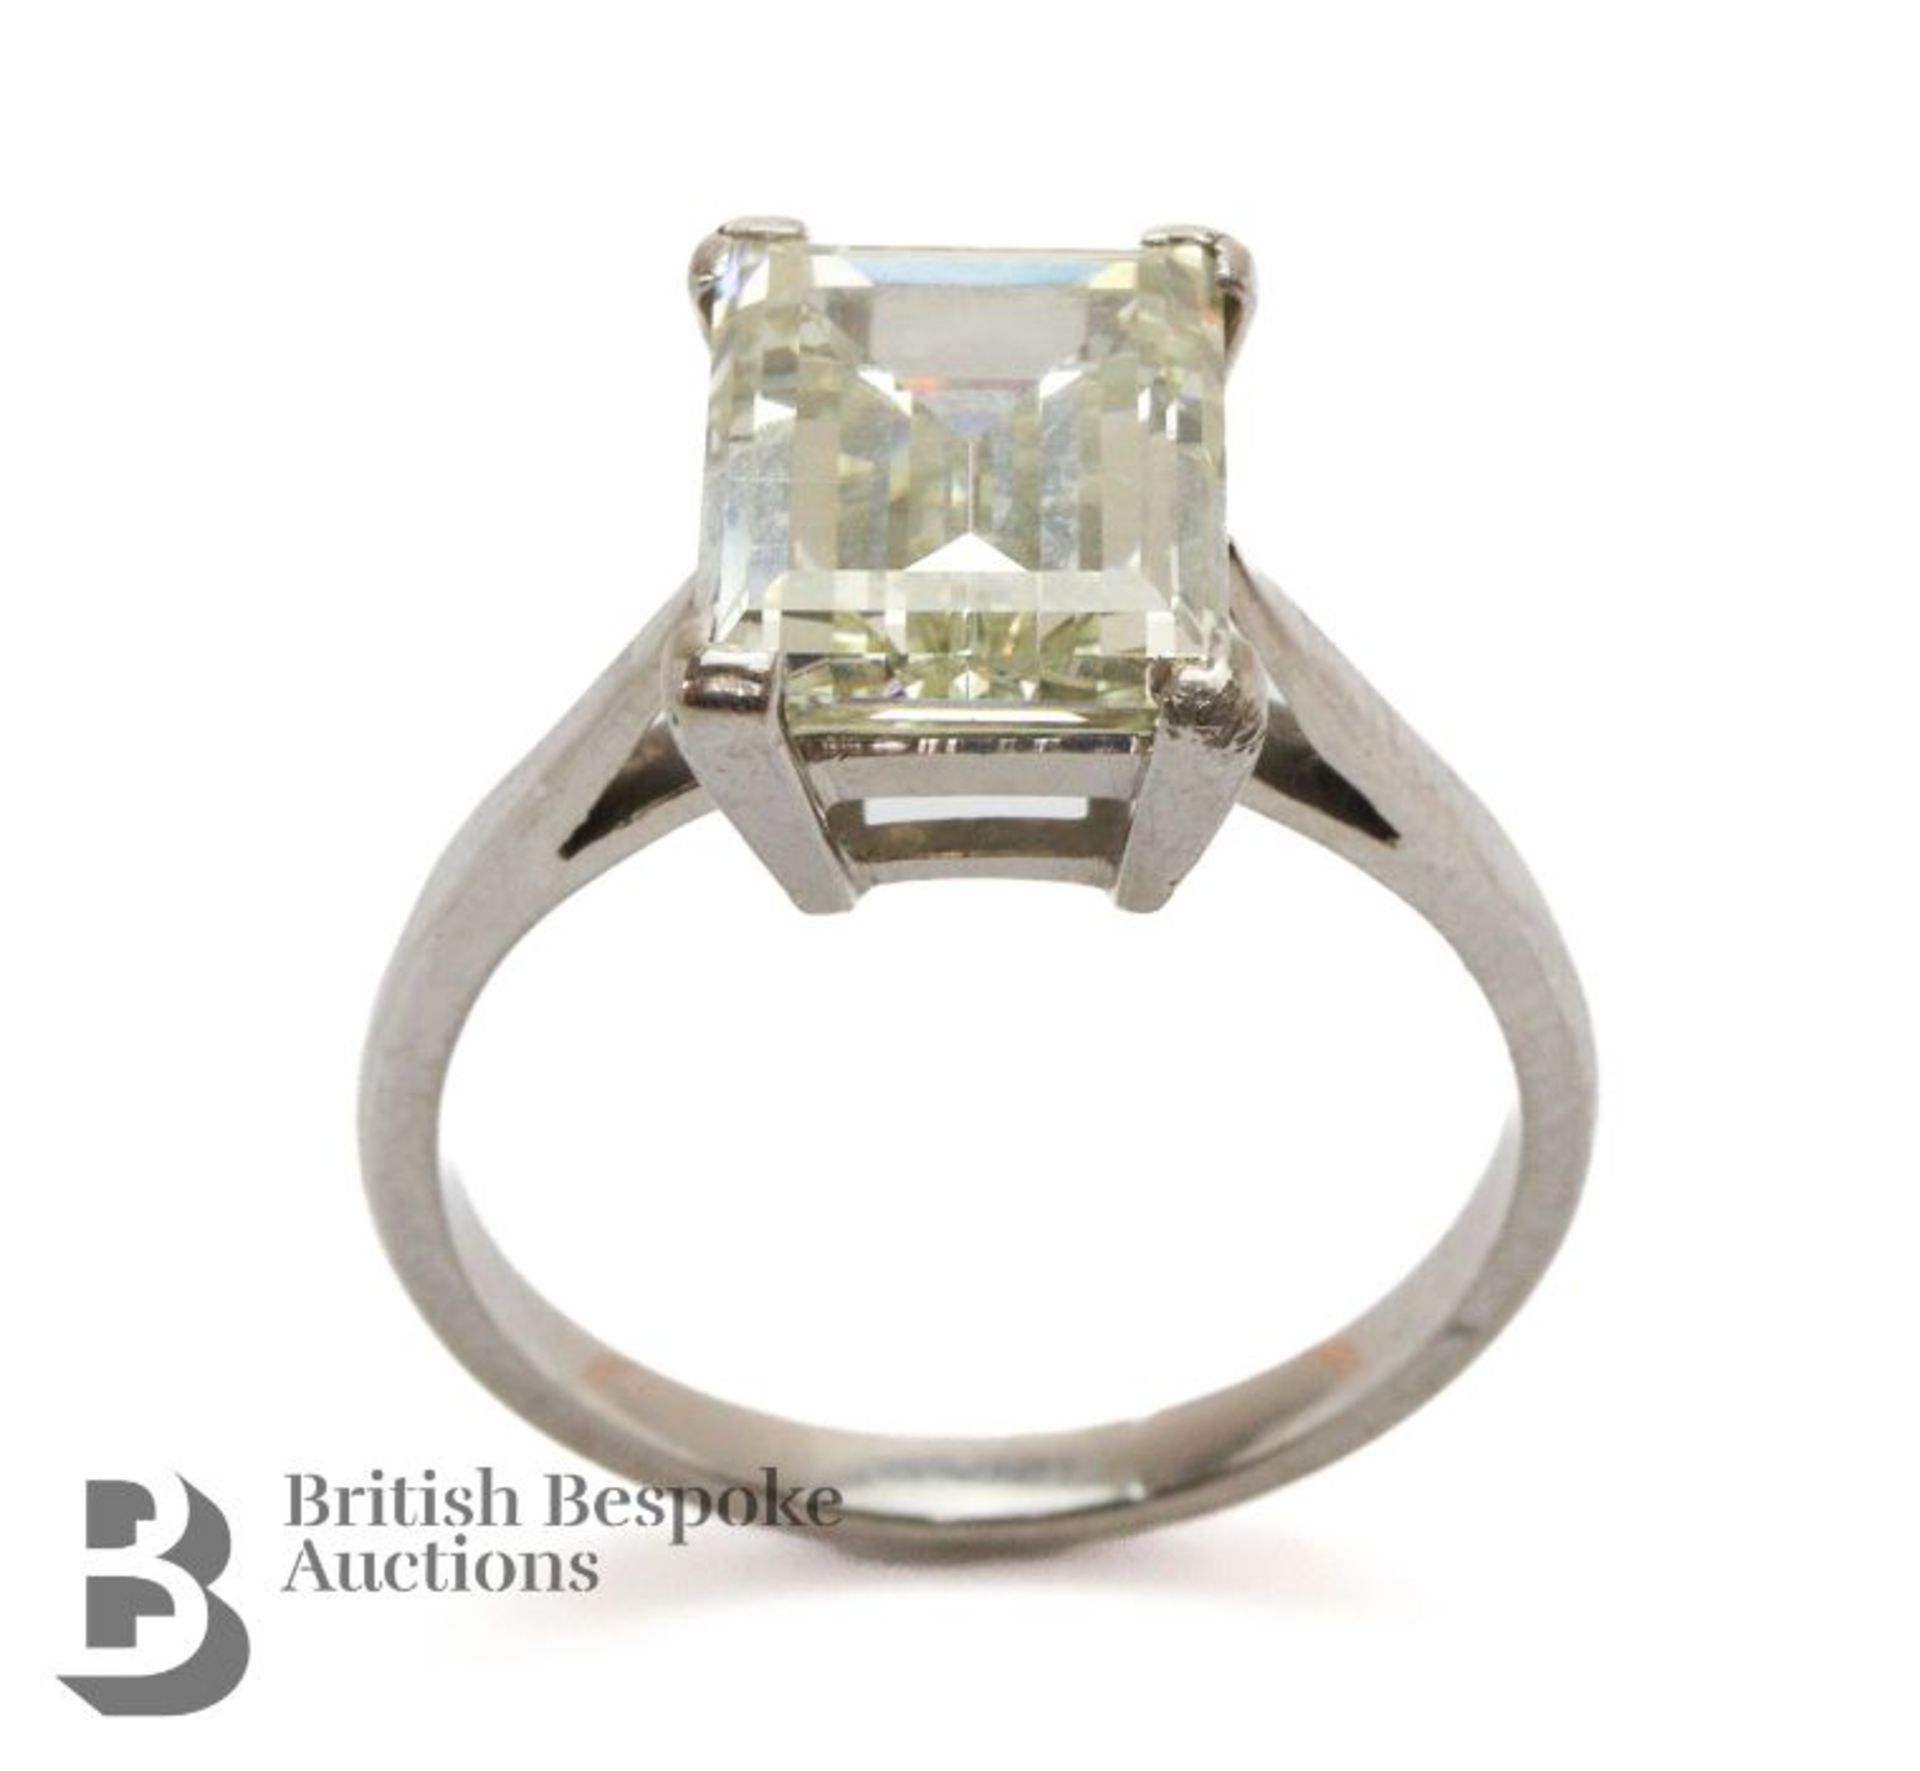 Stunning Vintage 18ct 4.39ct Solitaire Diamond Ring - Image 3 of 10